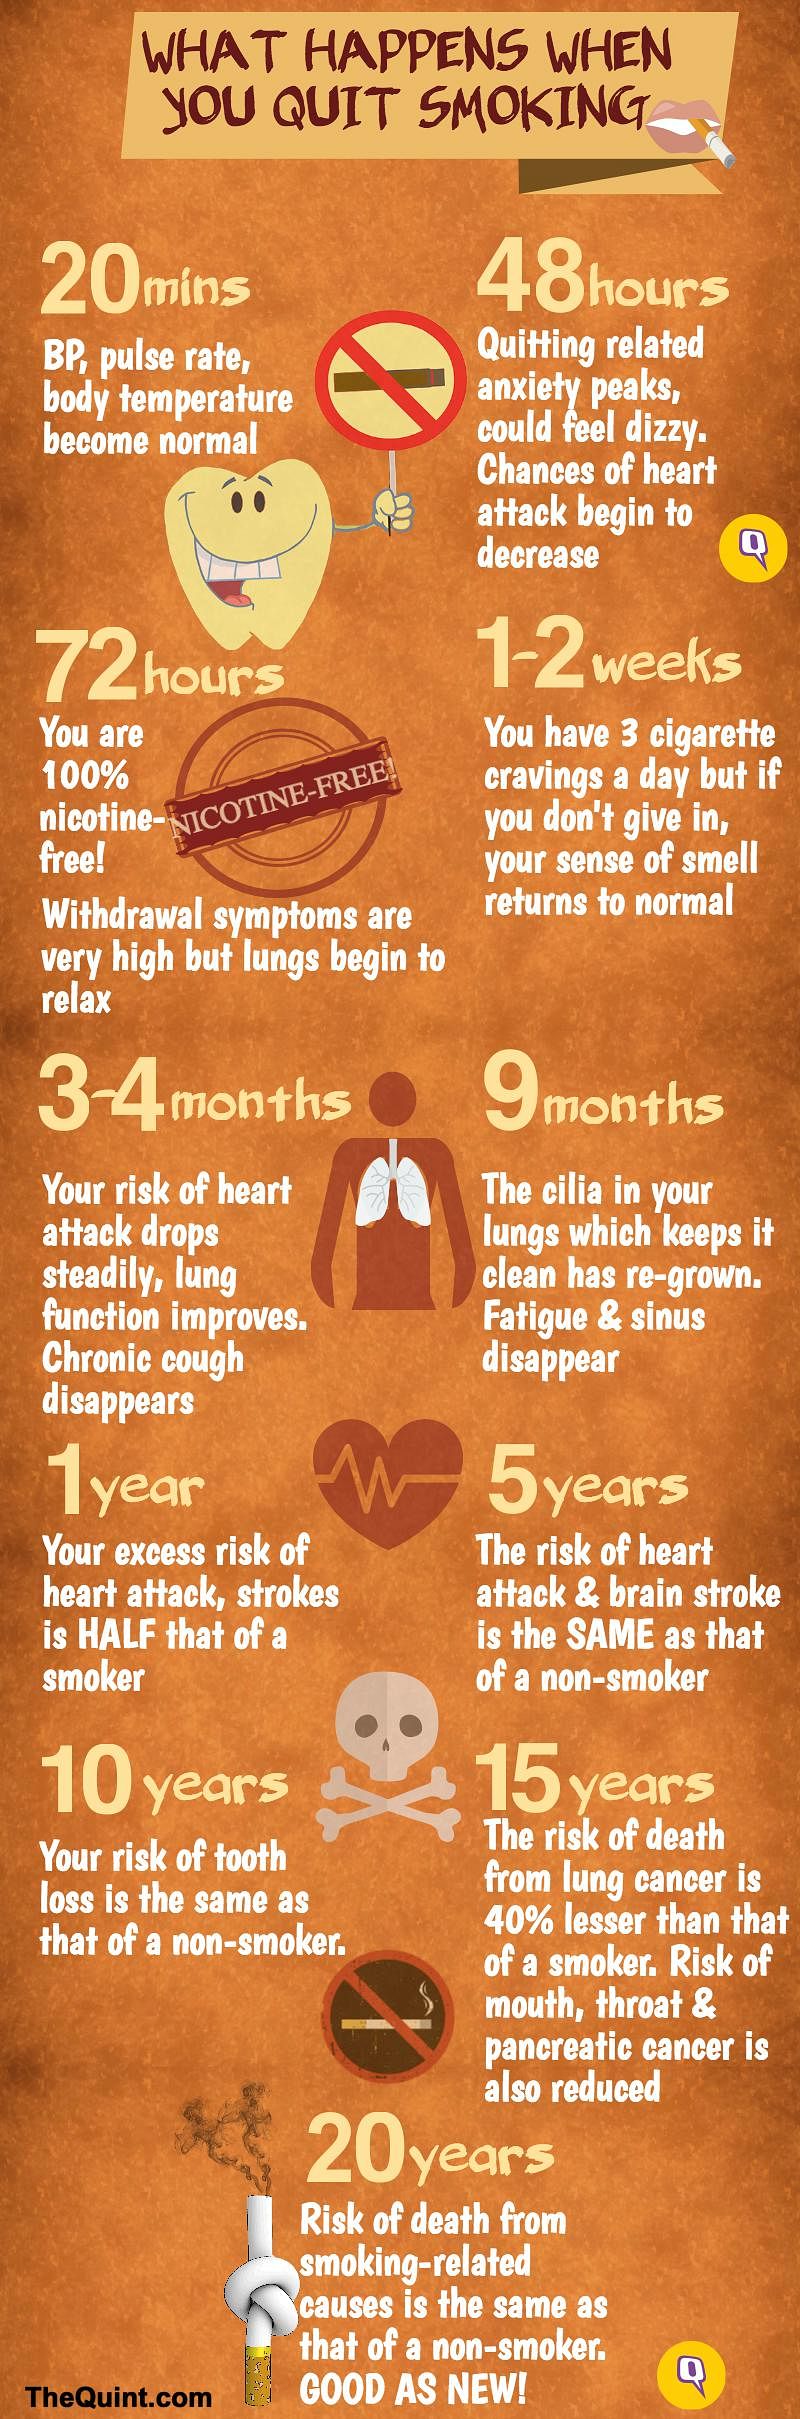 What Happens When You Quit Smoking [With Infographic]